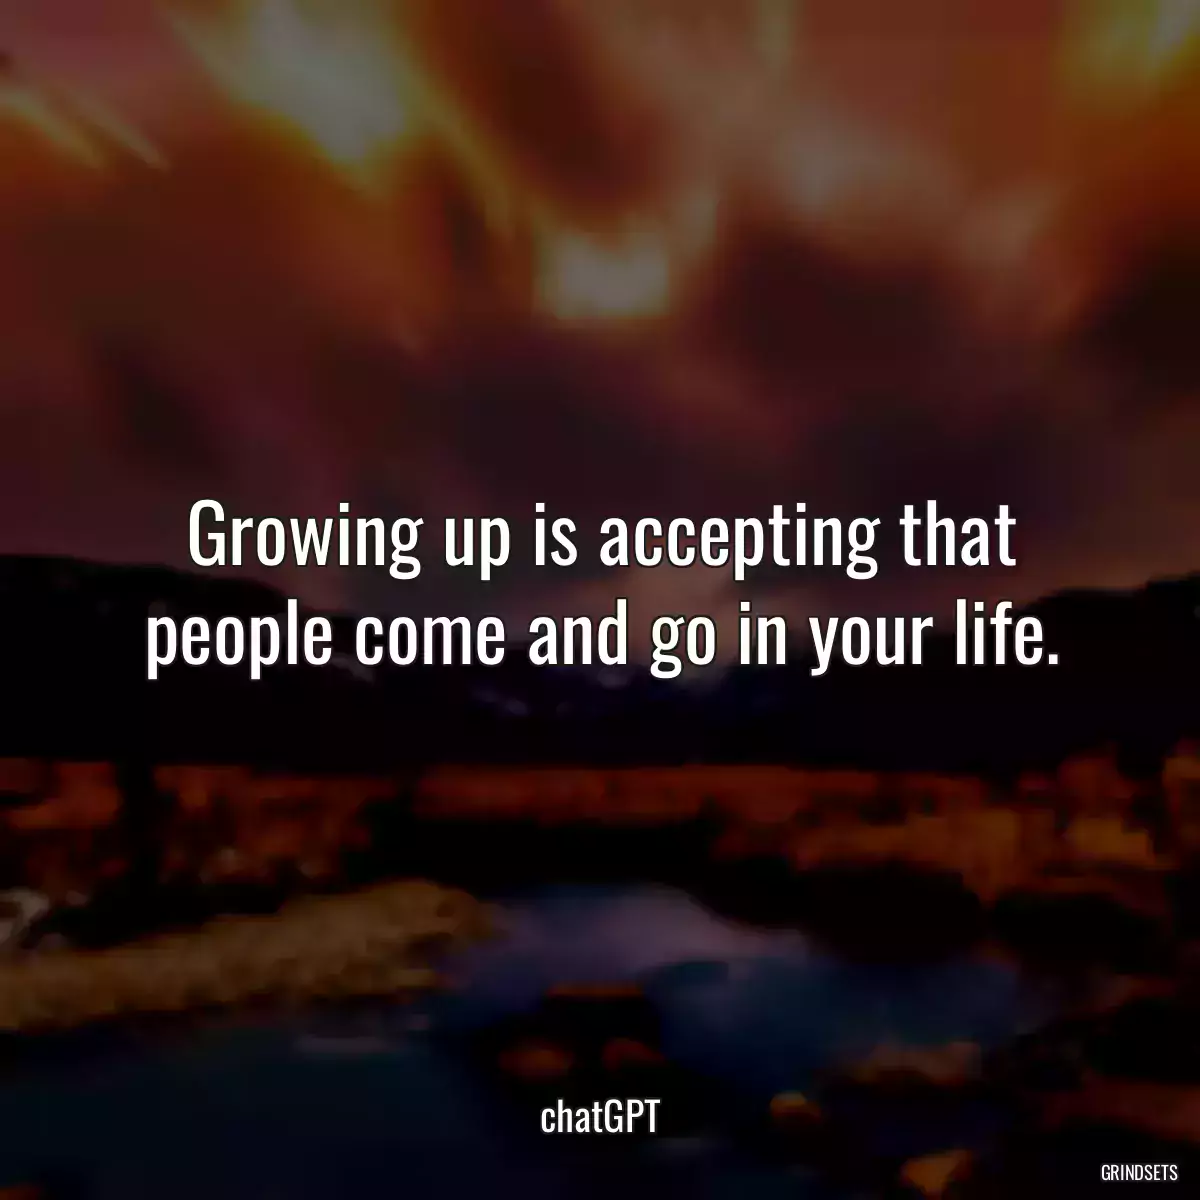 Growing up is accepting that people come and go in your life.